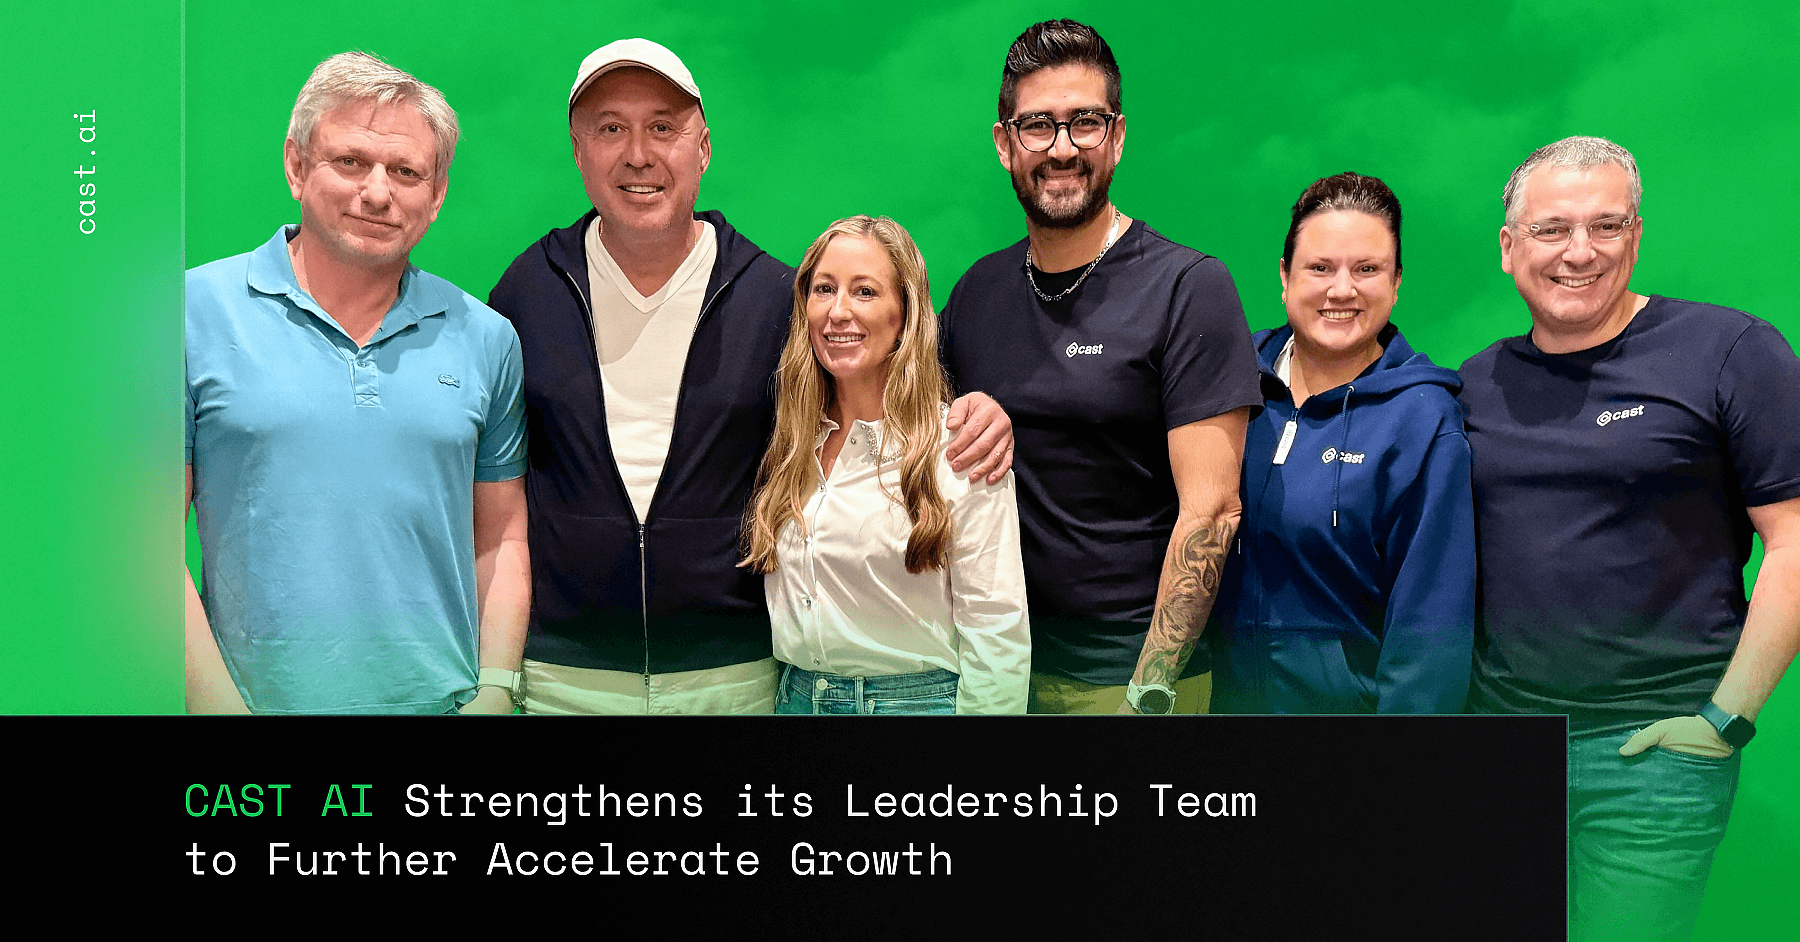 CAST AI Strengthens its Leadership Team to Further Accelerate Growth